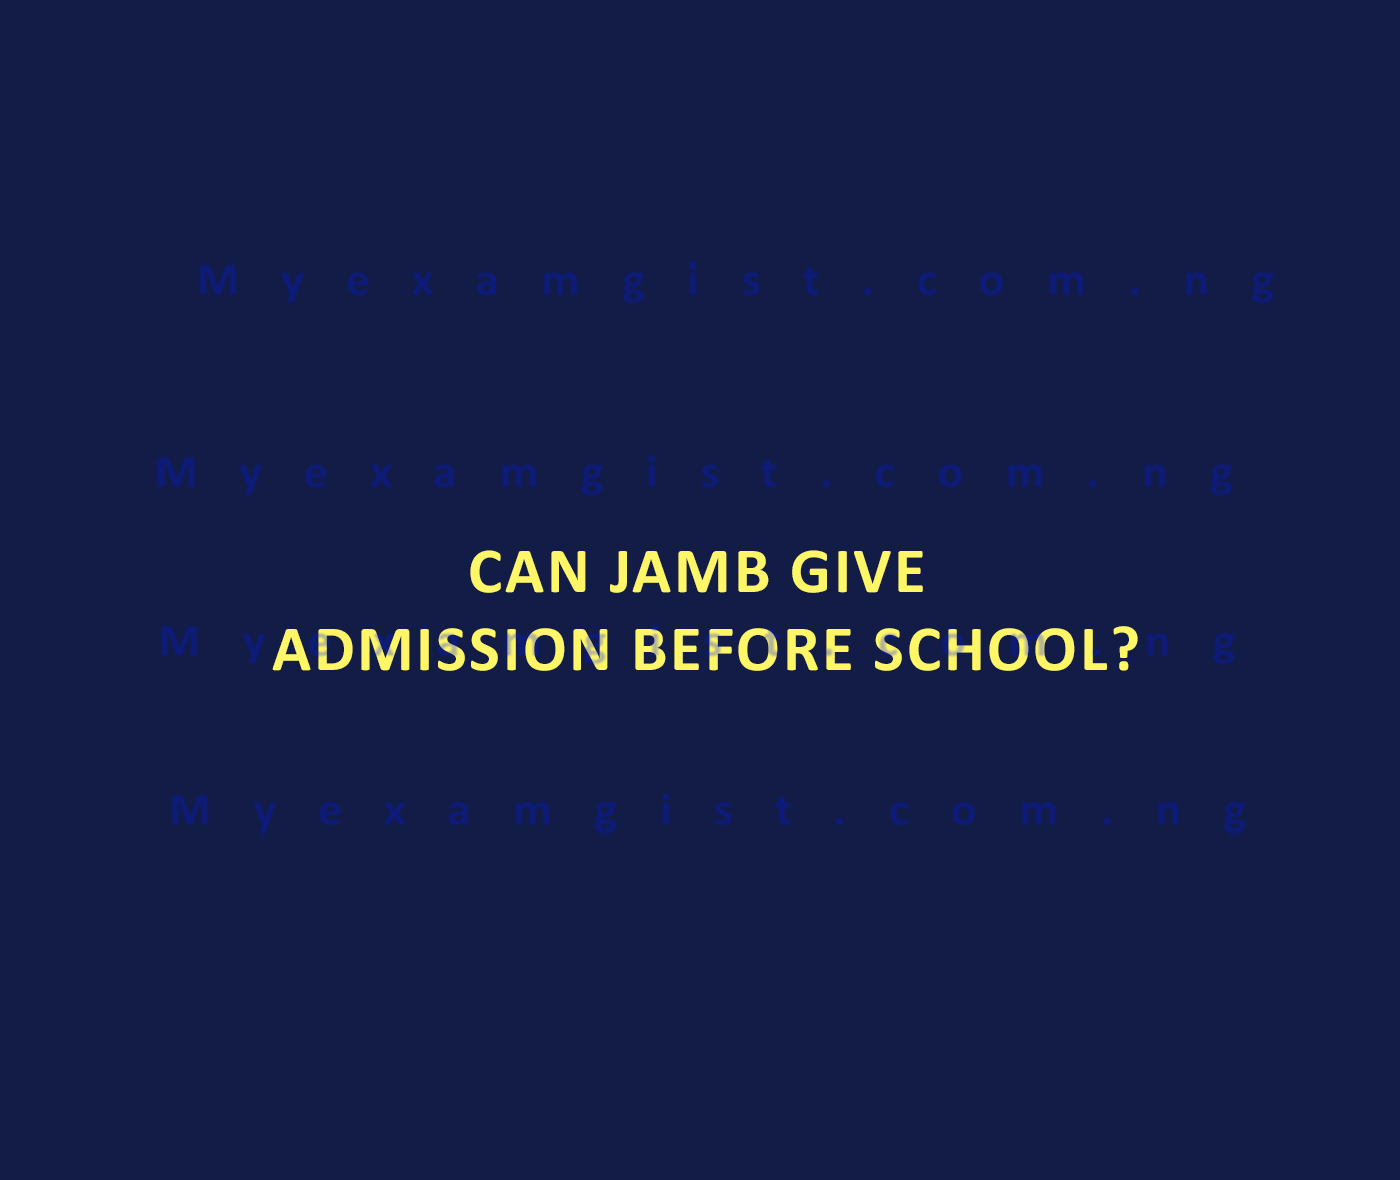 Can JAMB give admission before school?